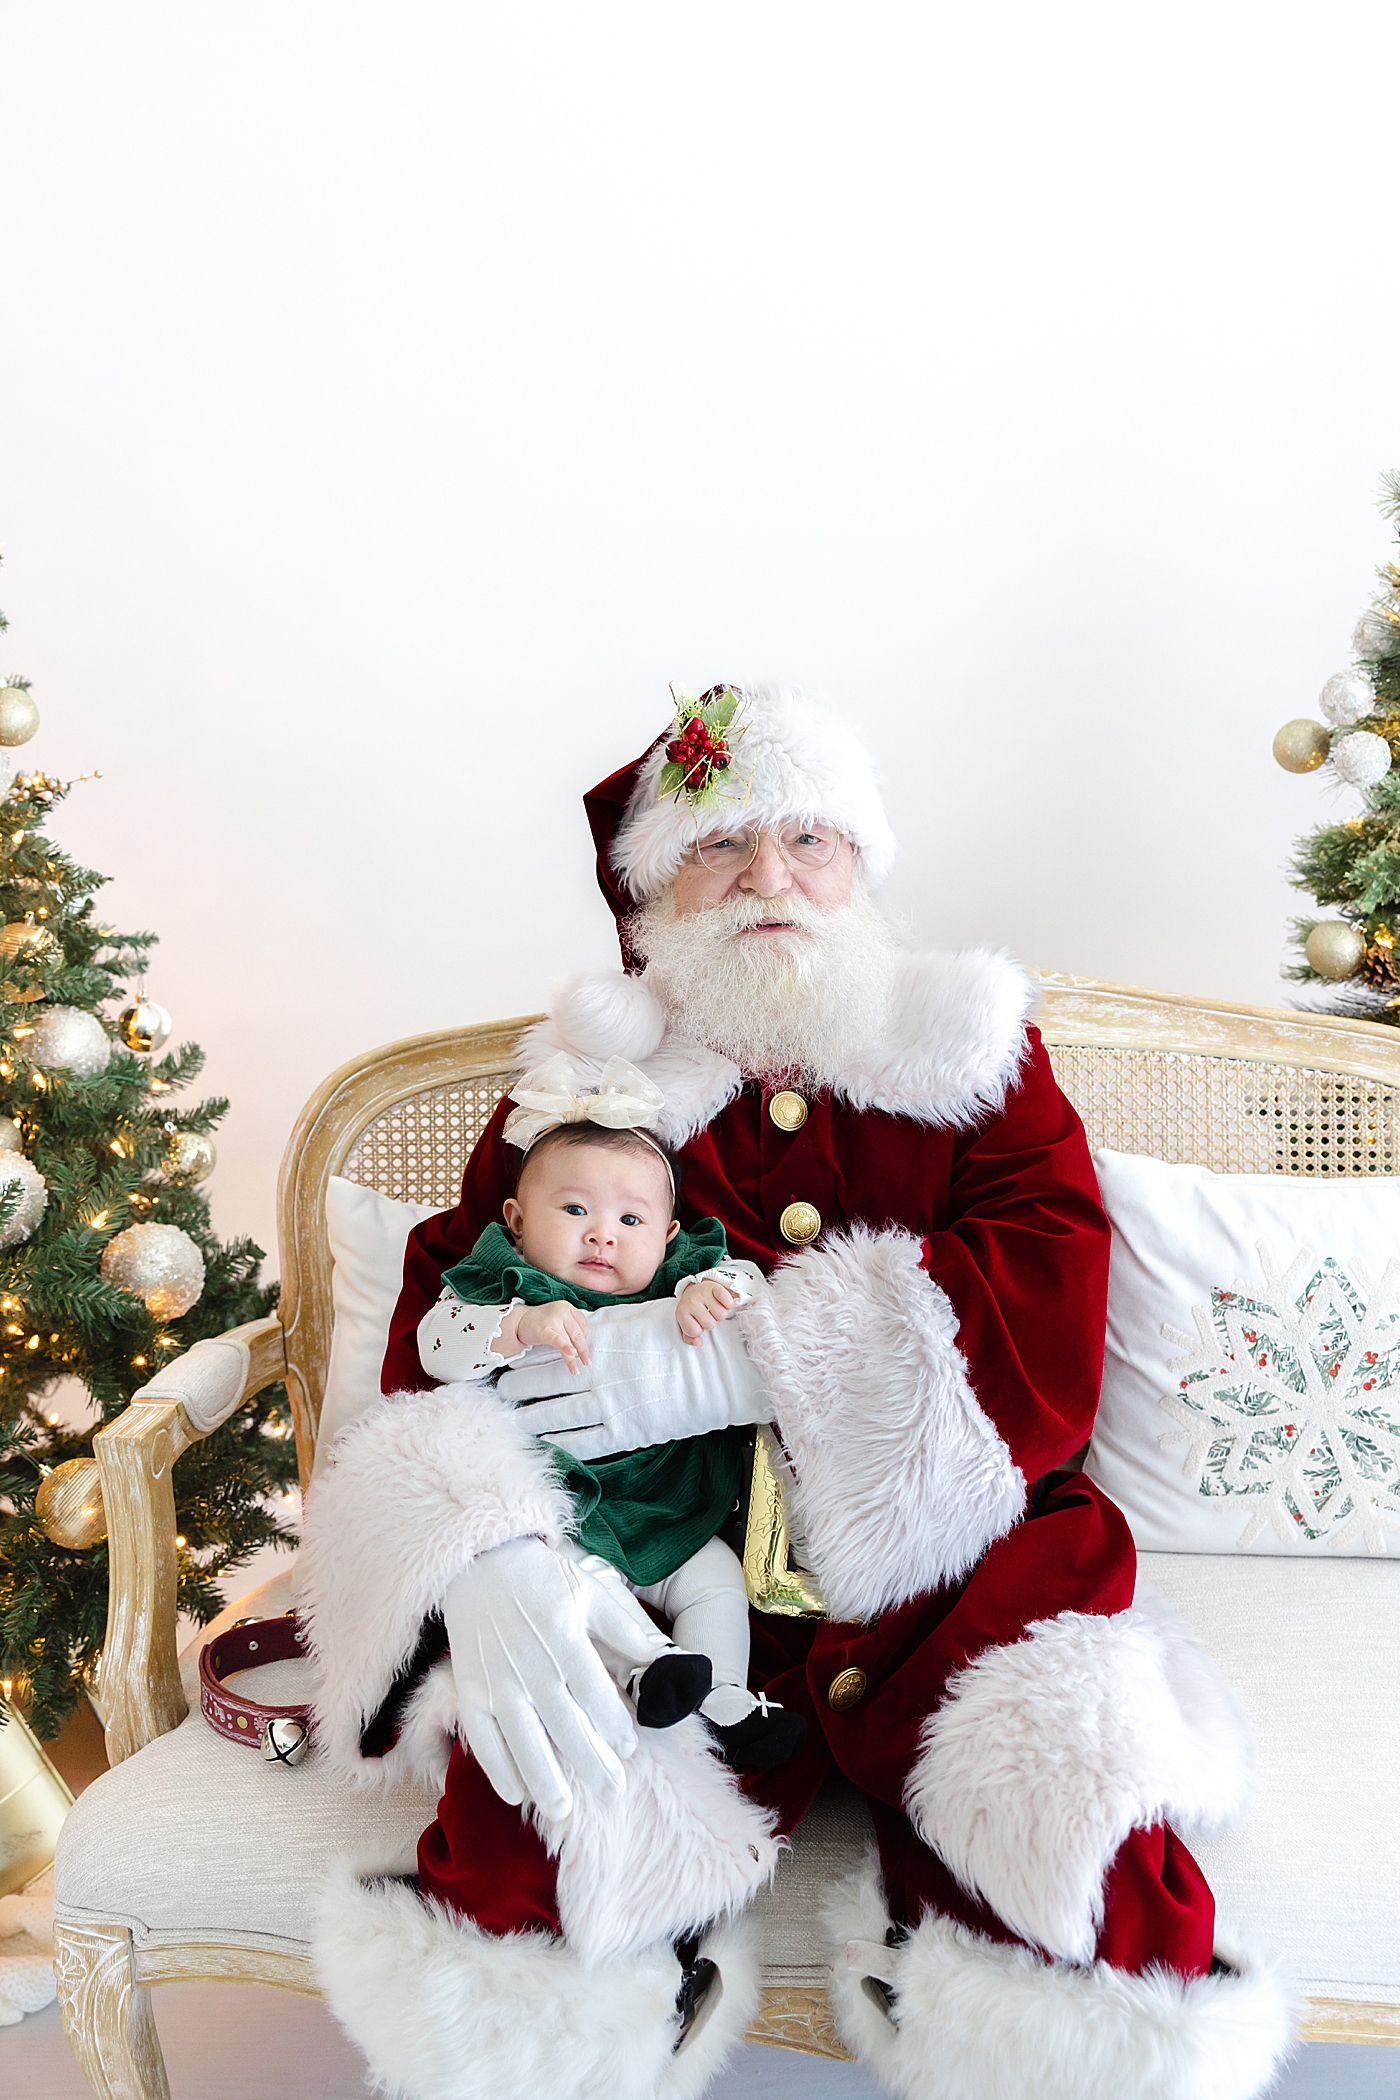 Santa holding a baby girl in green during Santa mini sessions in Austin | Image by Sana Ahmed Photography